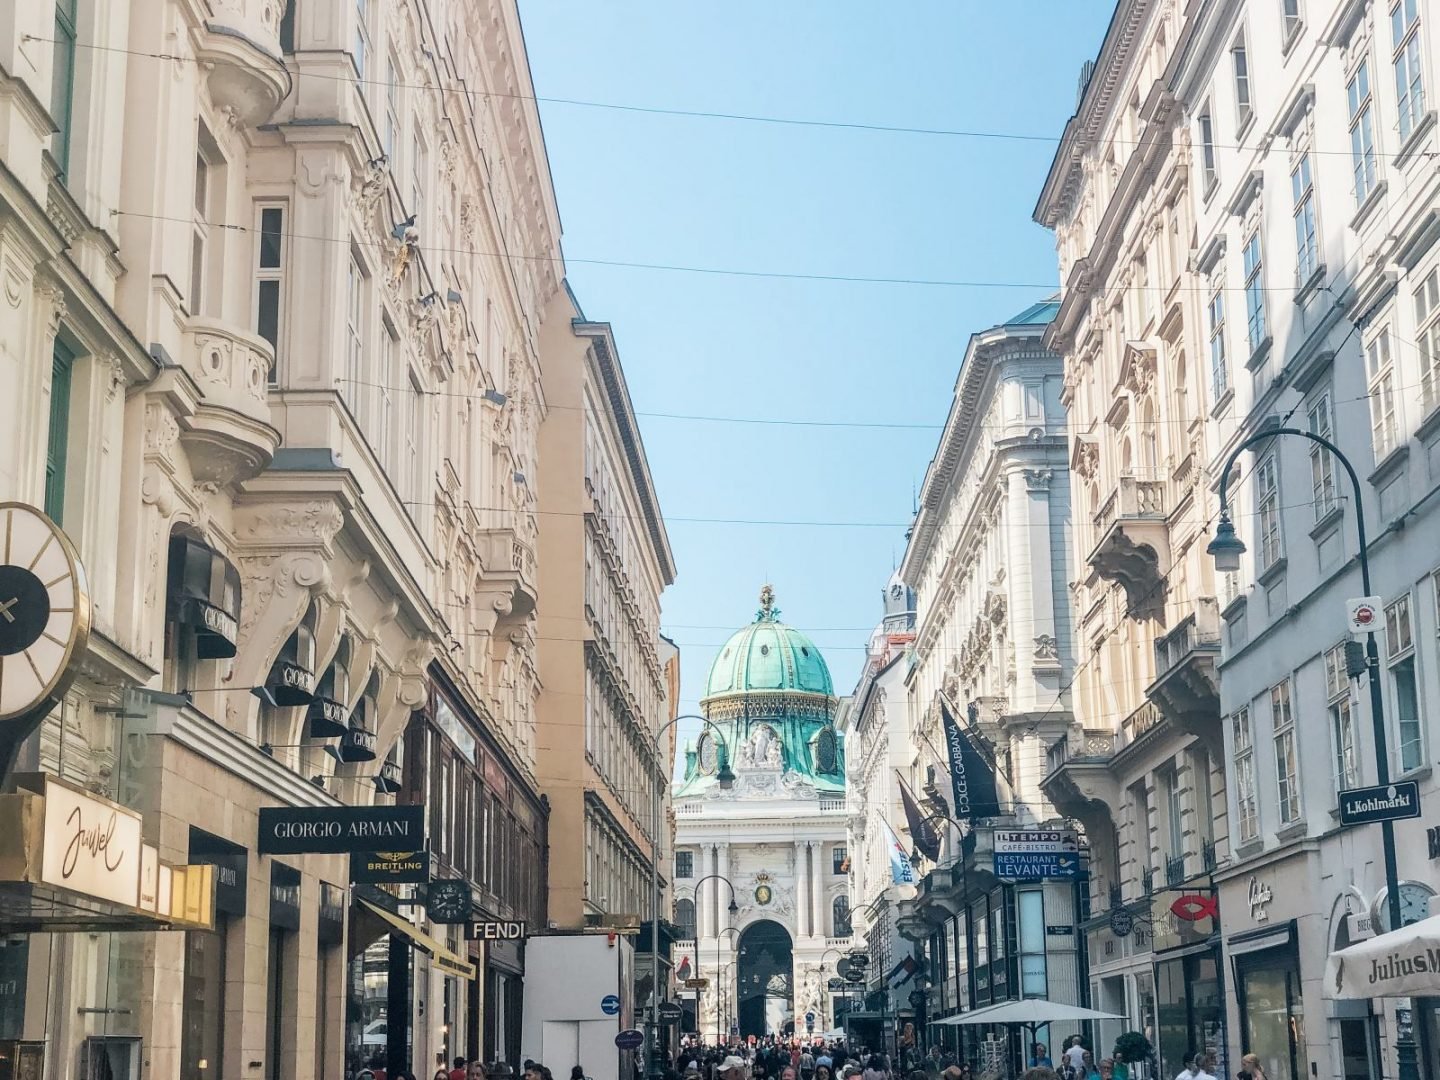 Wandering the streets of Vienna